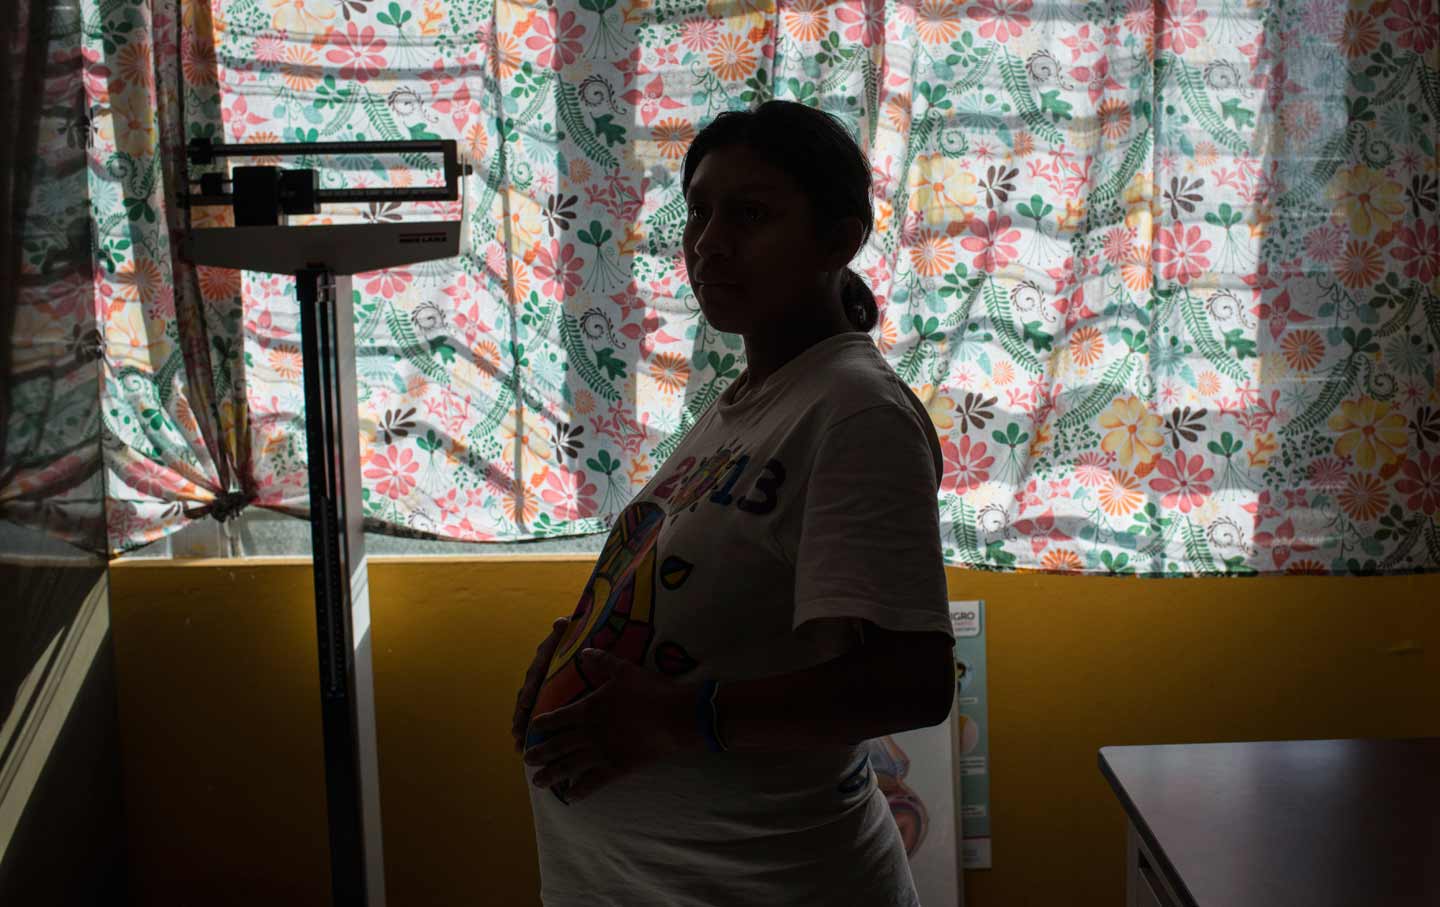 What Happens When Zika Hits the Country With the World’s Strictest Abortion Laws?